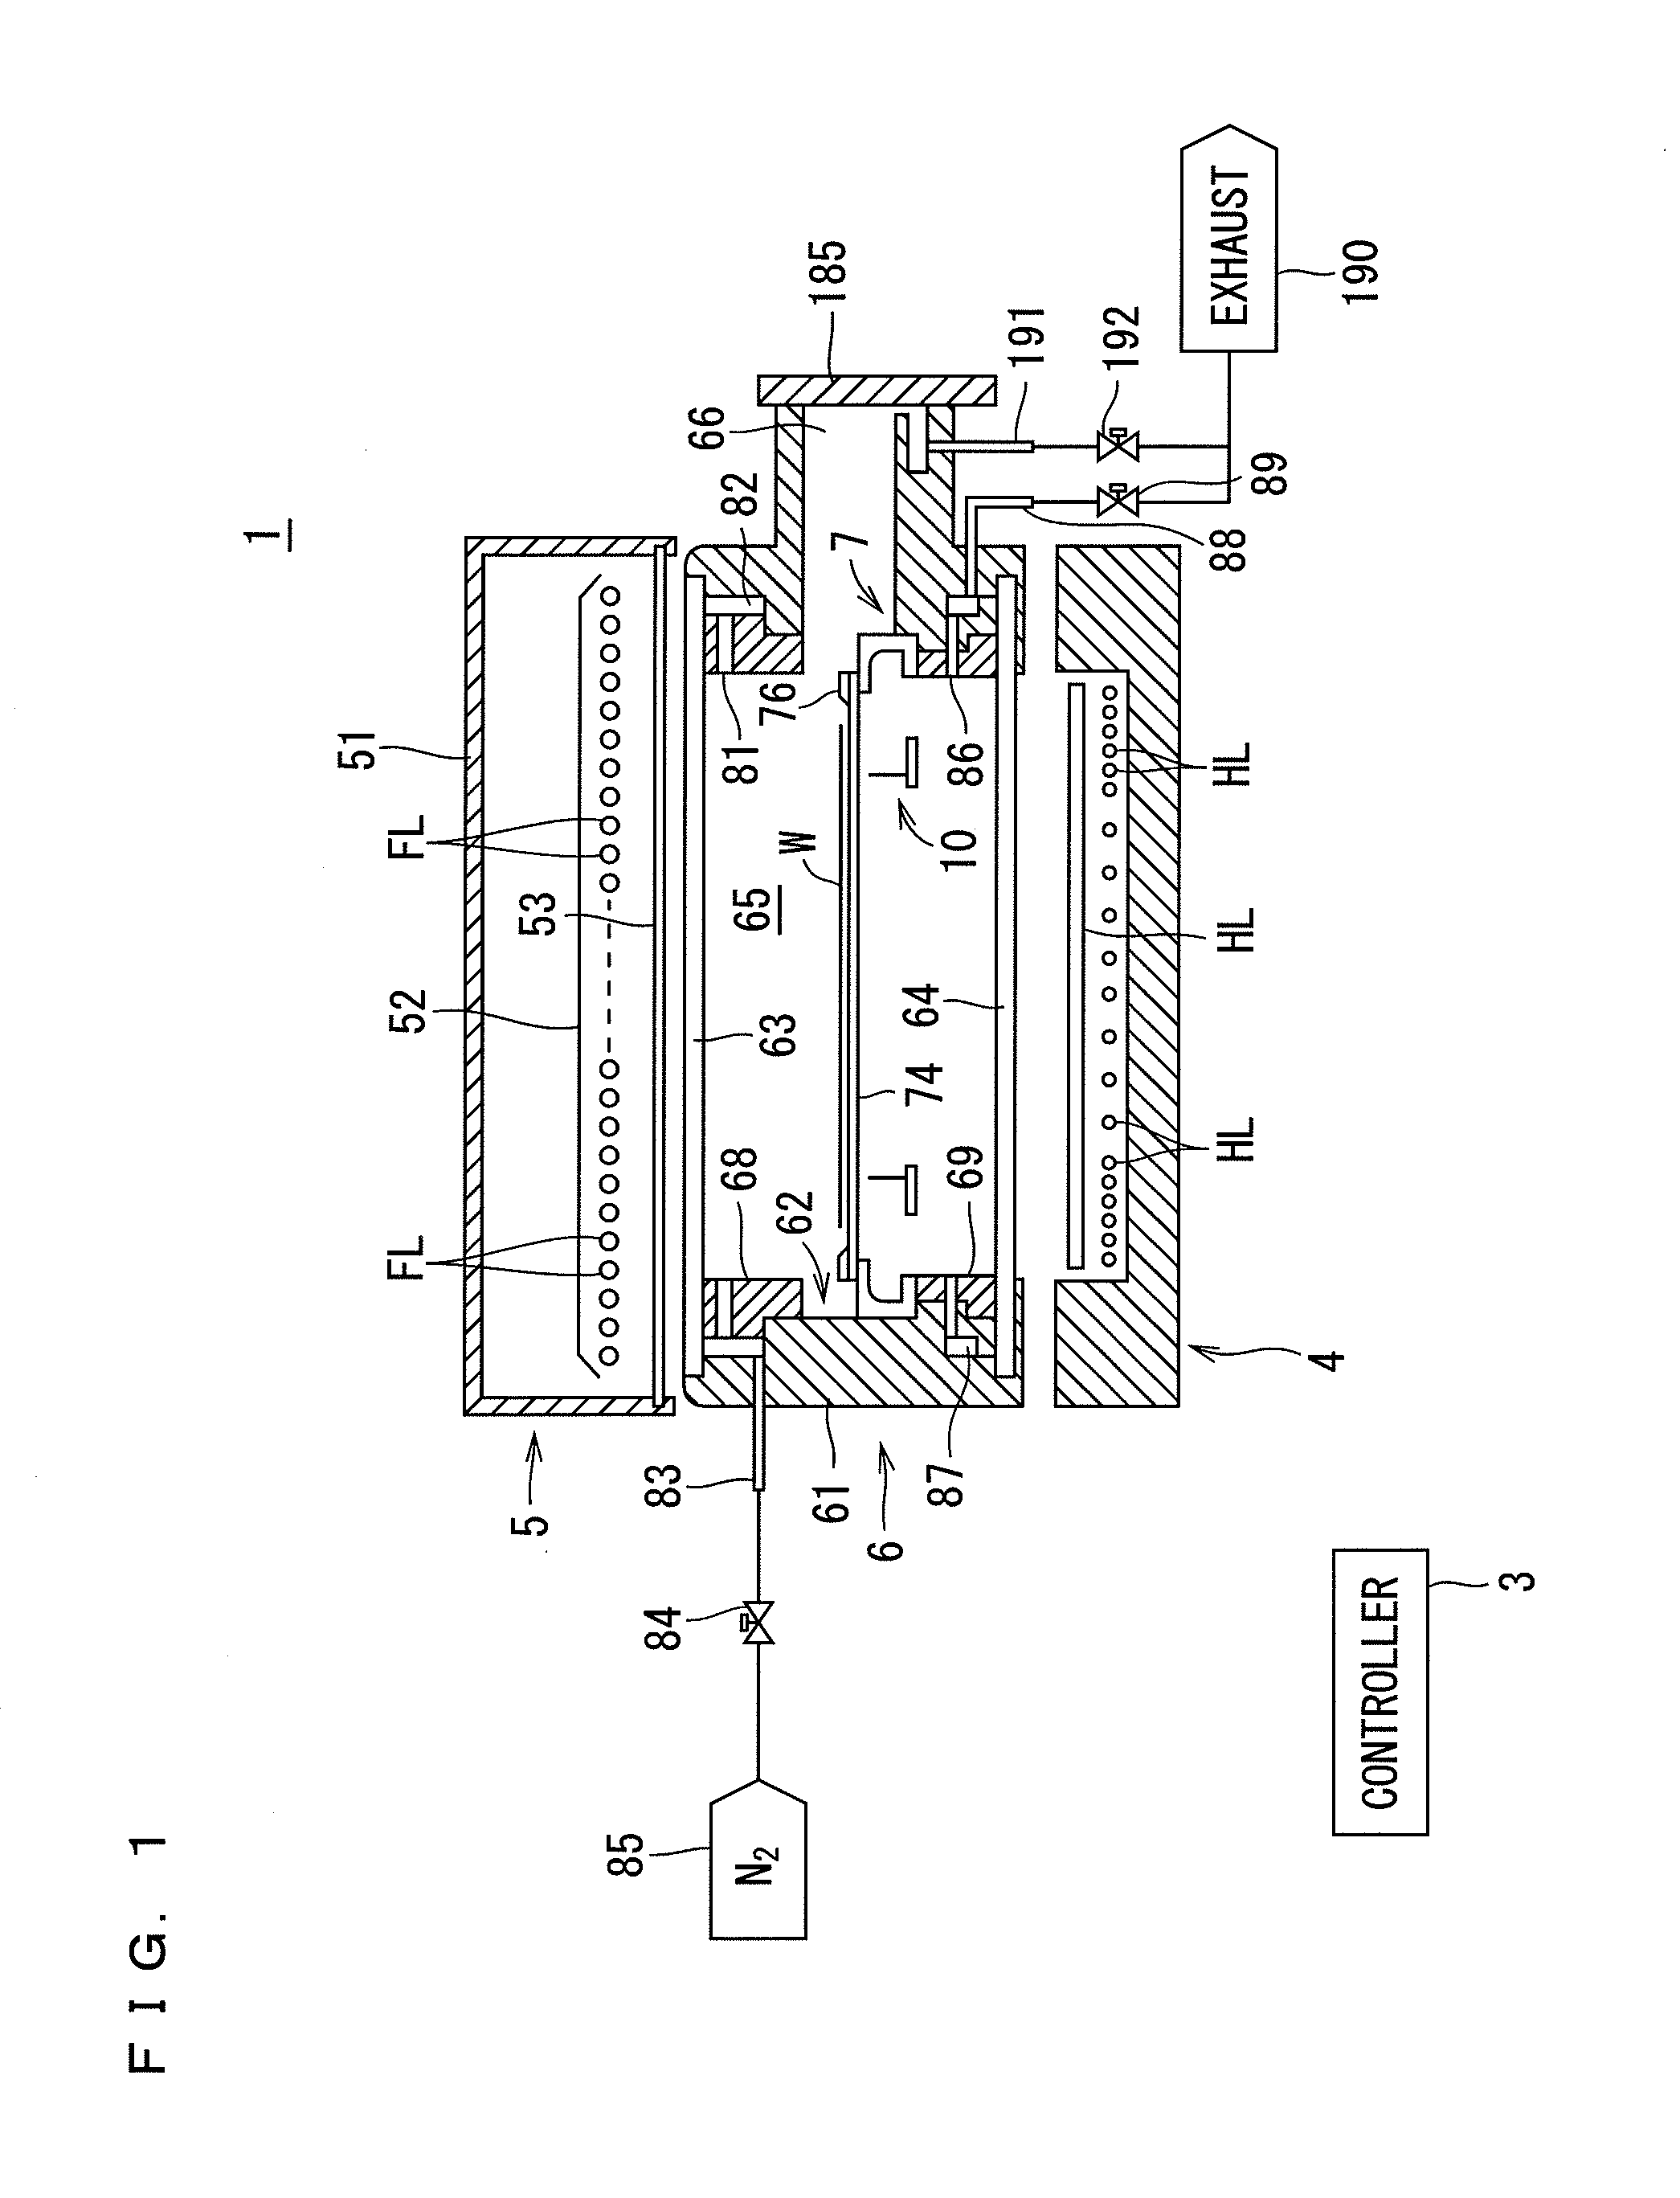 Heat treatment apparatus for heating substrate by irradiation with flash light